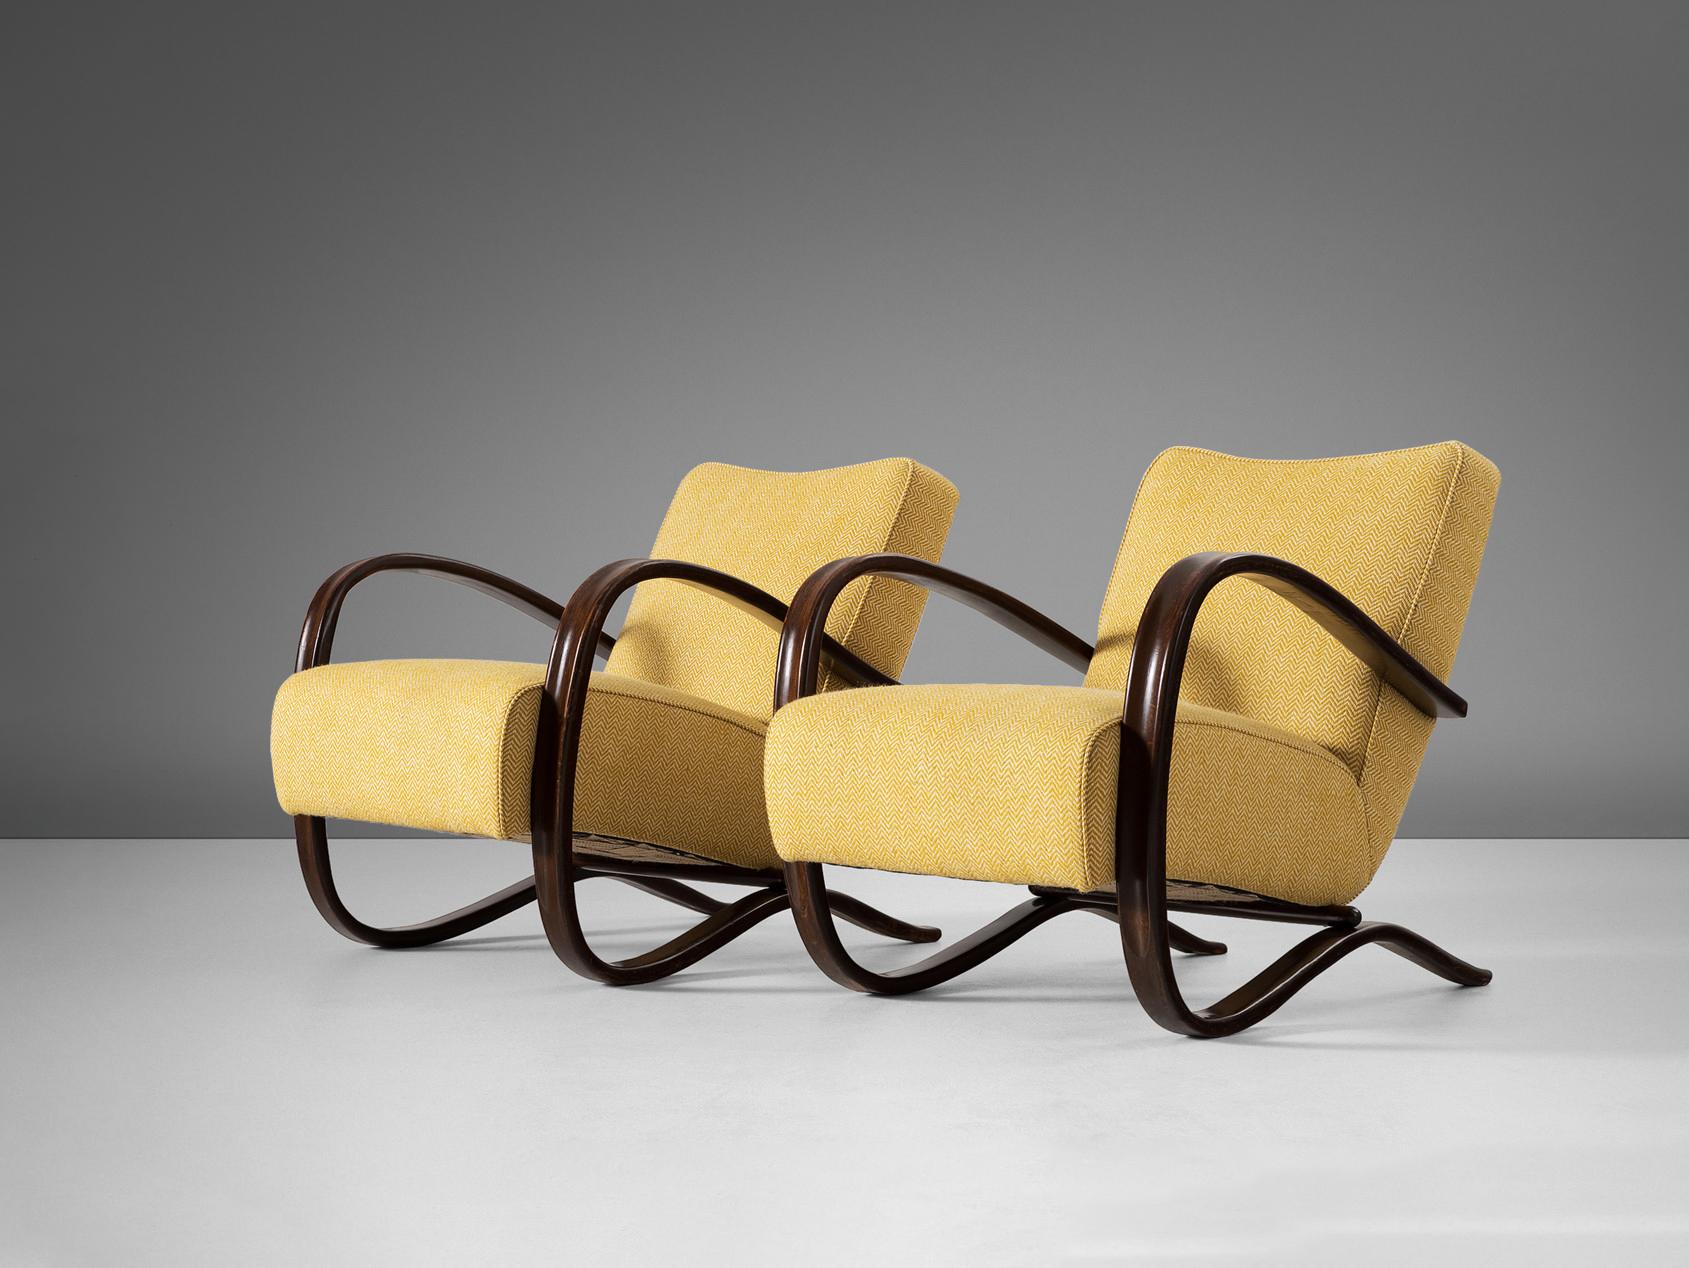 Jindrich Halabala, lounge chairs, model 'H269', stained beech, fabric, Czech Republic, 1930s.

Extraordinary easy chairs in yellow upholstery. These chairs have a very dynamic and abundant appearance and the color of the upholstery gives them a